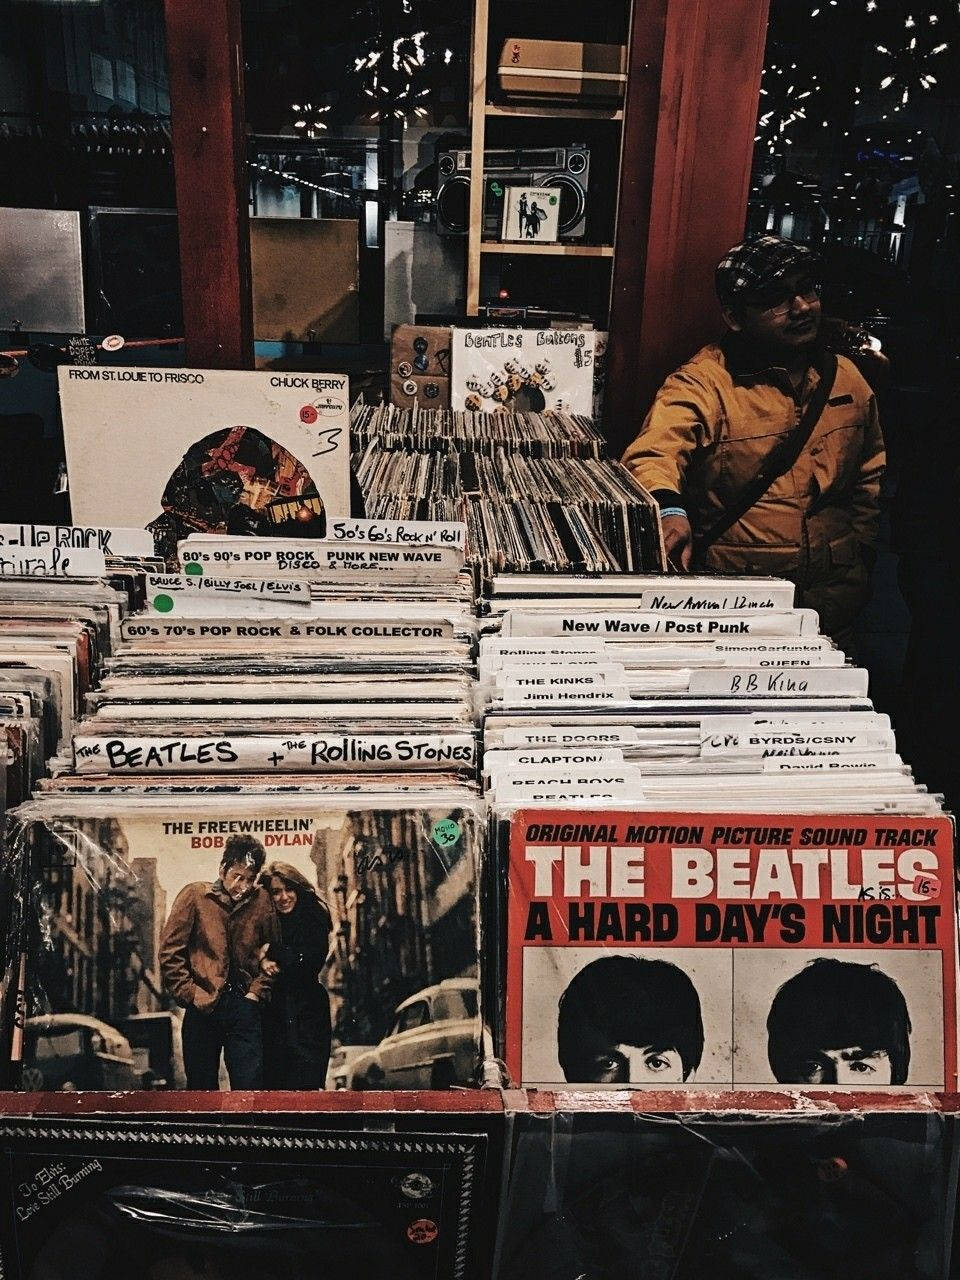 Vintage 90's Record Store Aesthetic